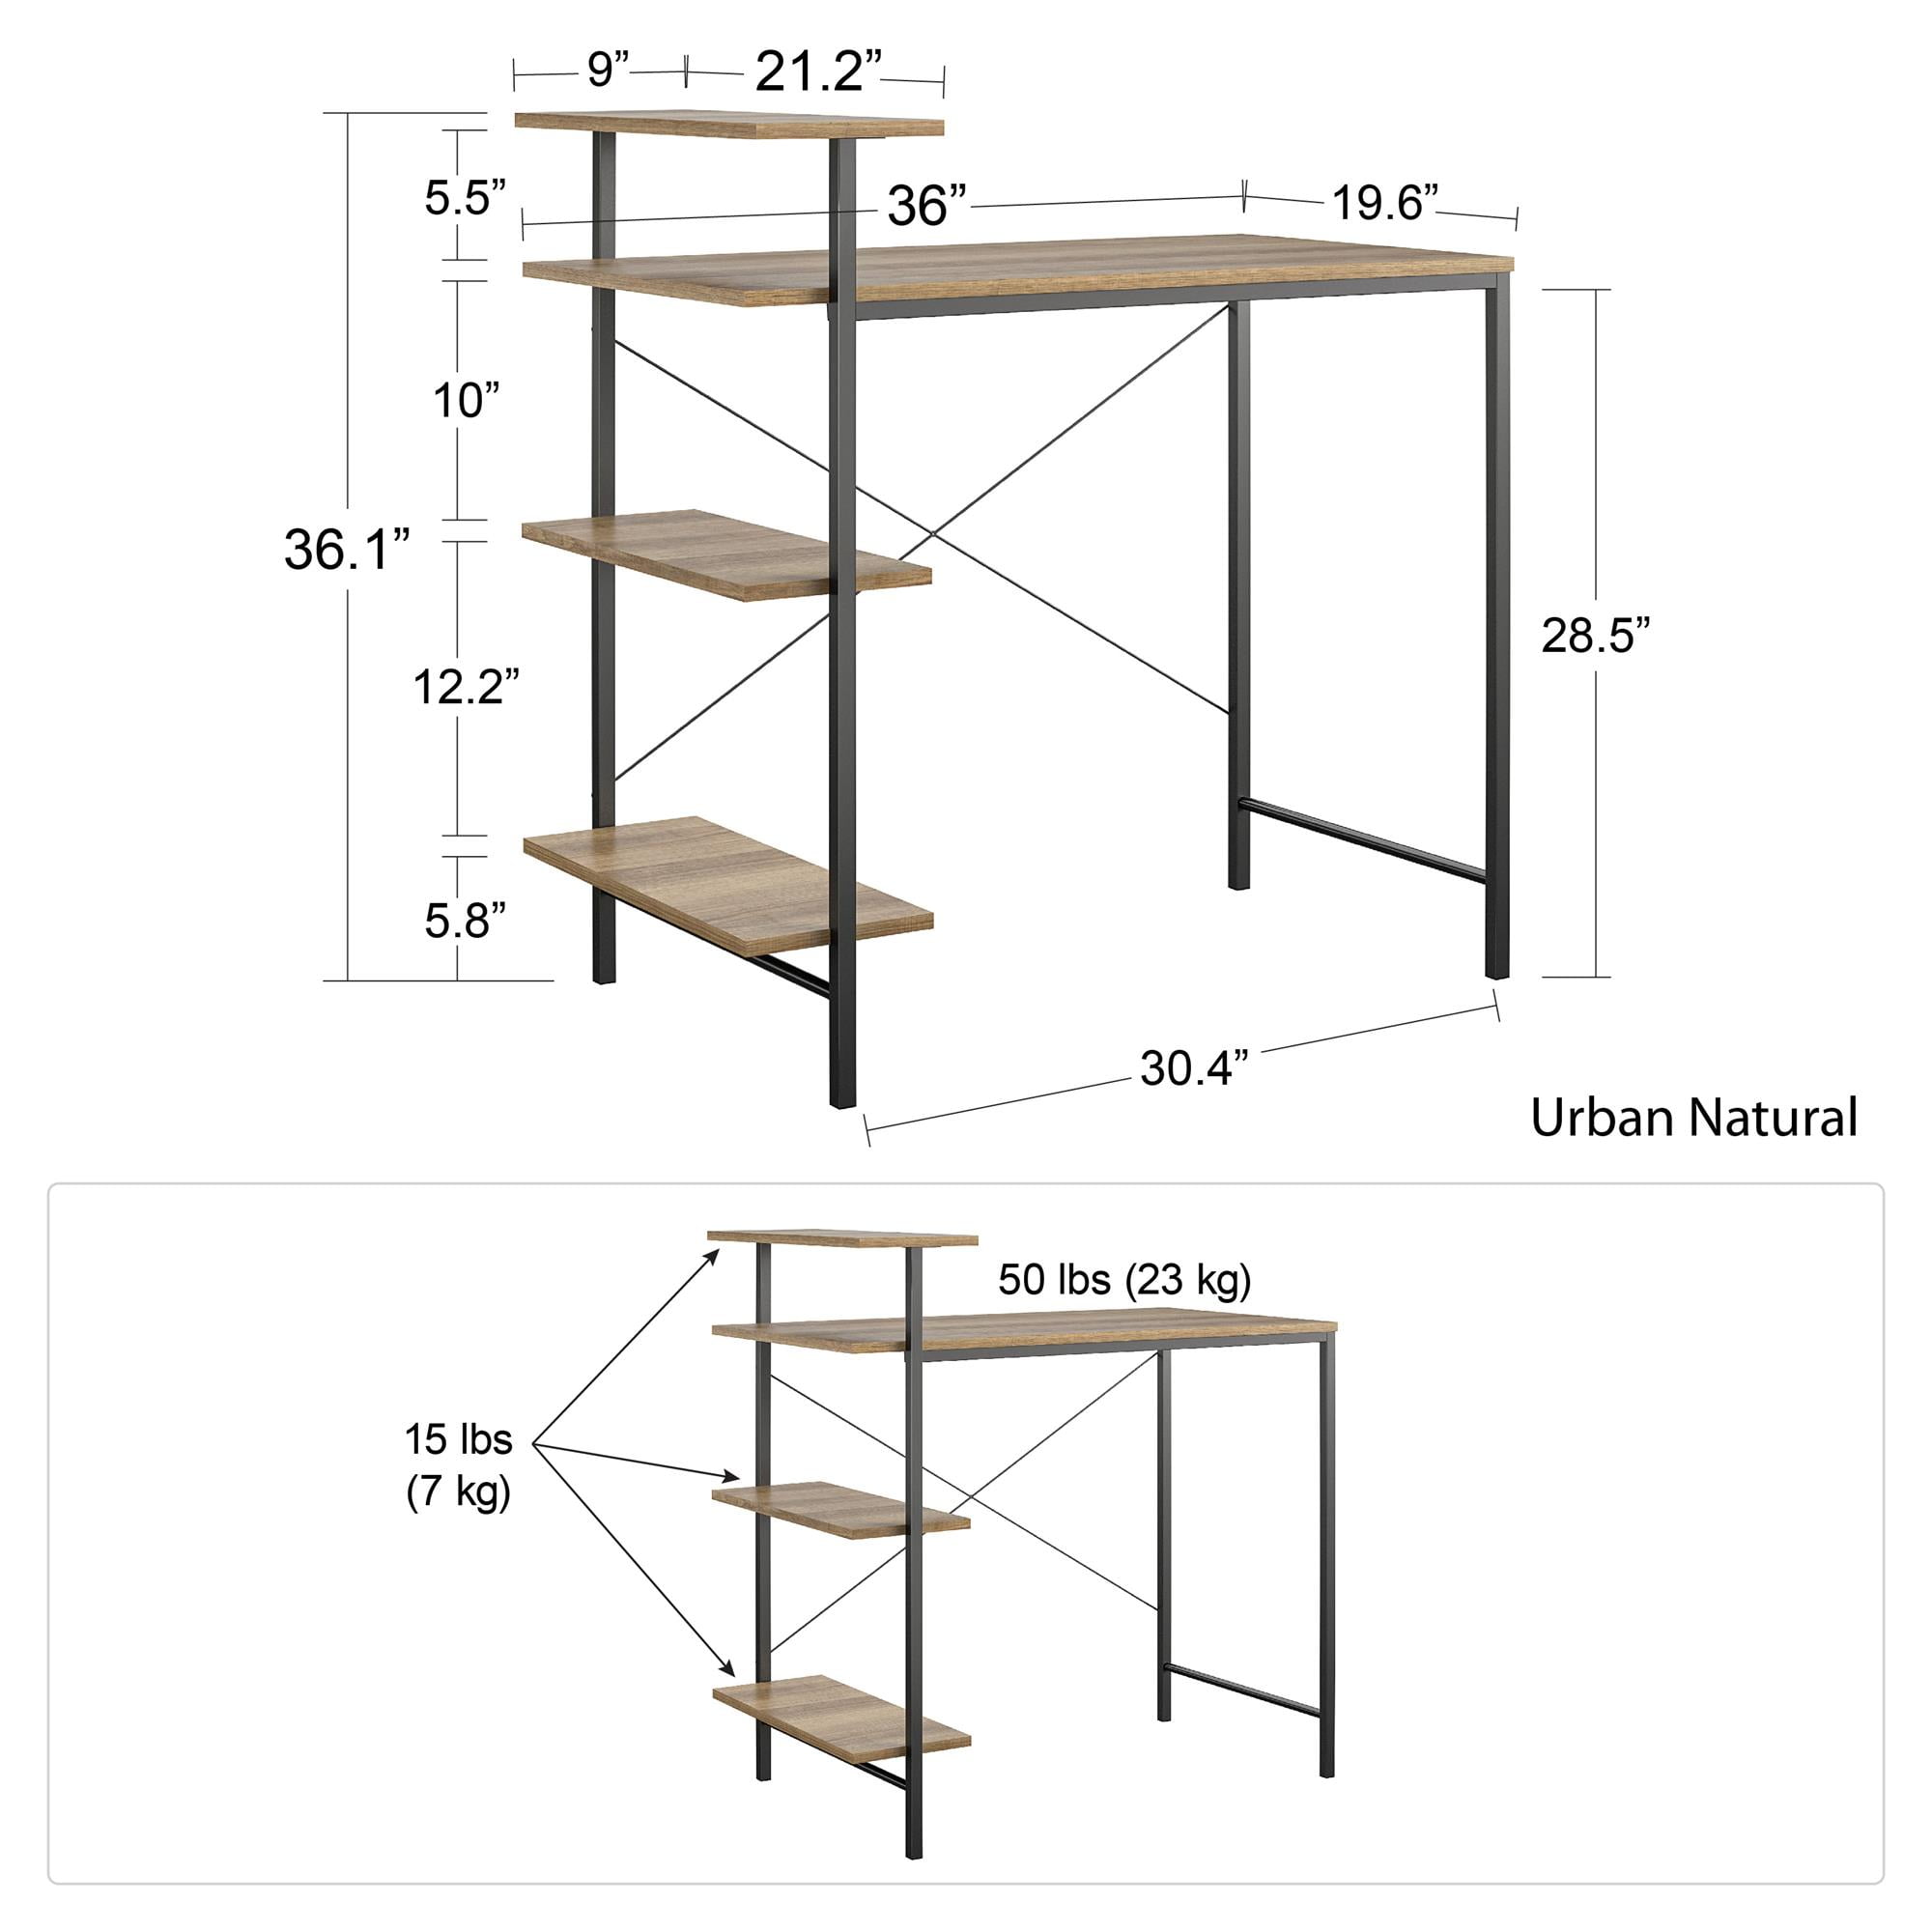 What Are The Standard Student Desk Dimensions? - Desky USA